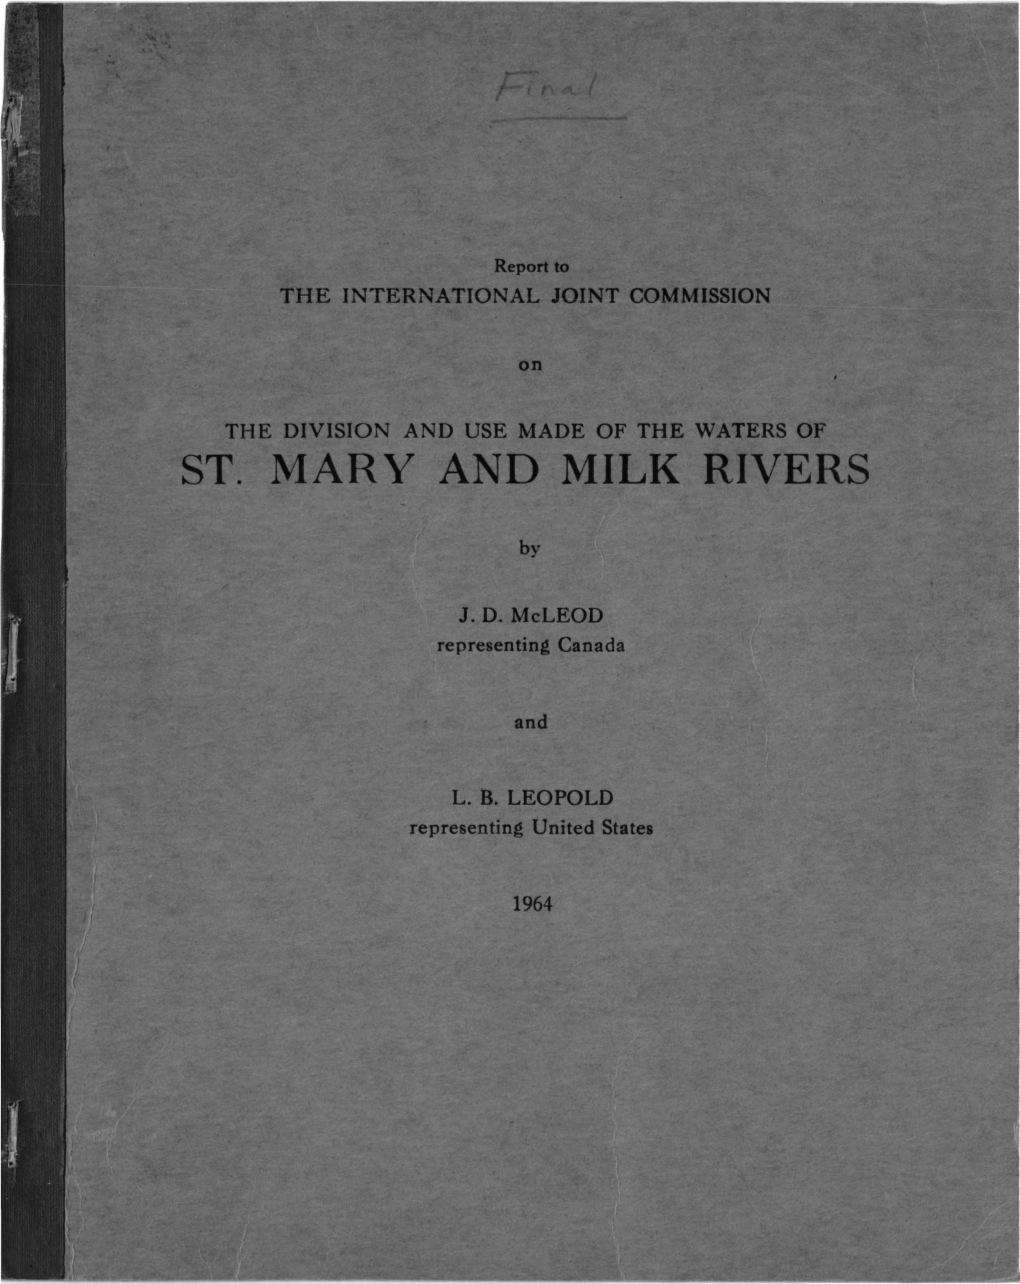 St. Mary and Milk Rivers